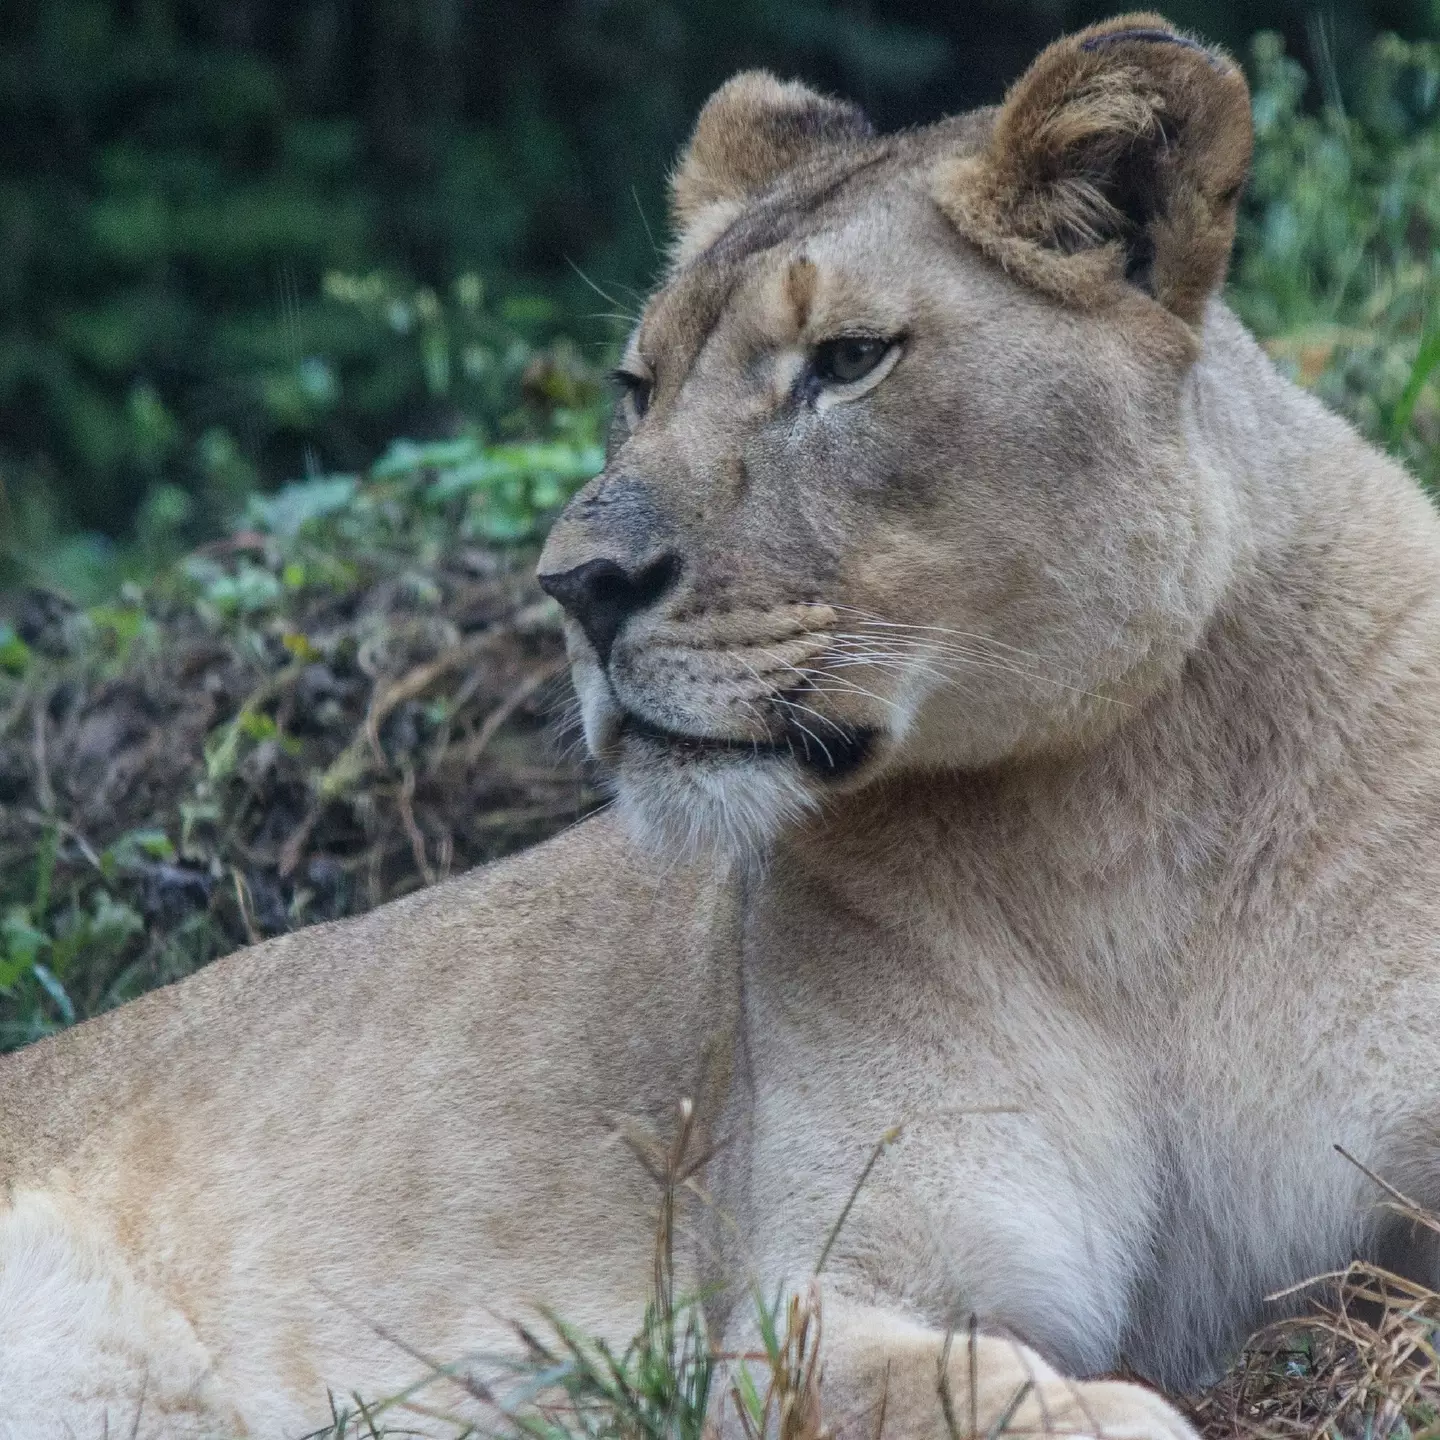 Akili was dearly loved by staff at the zoo.